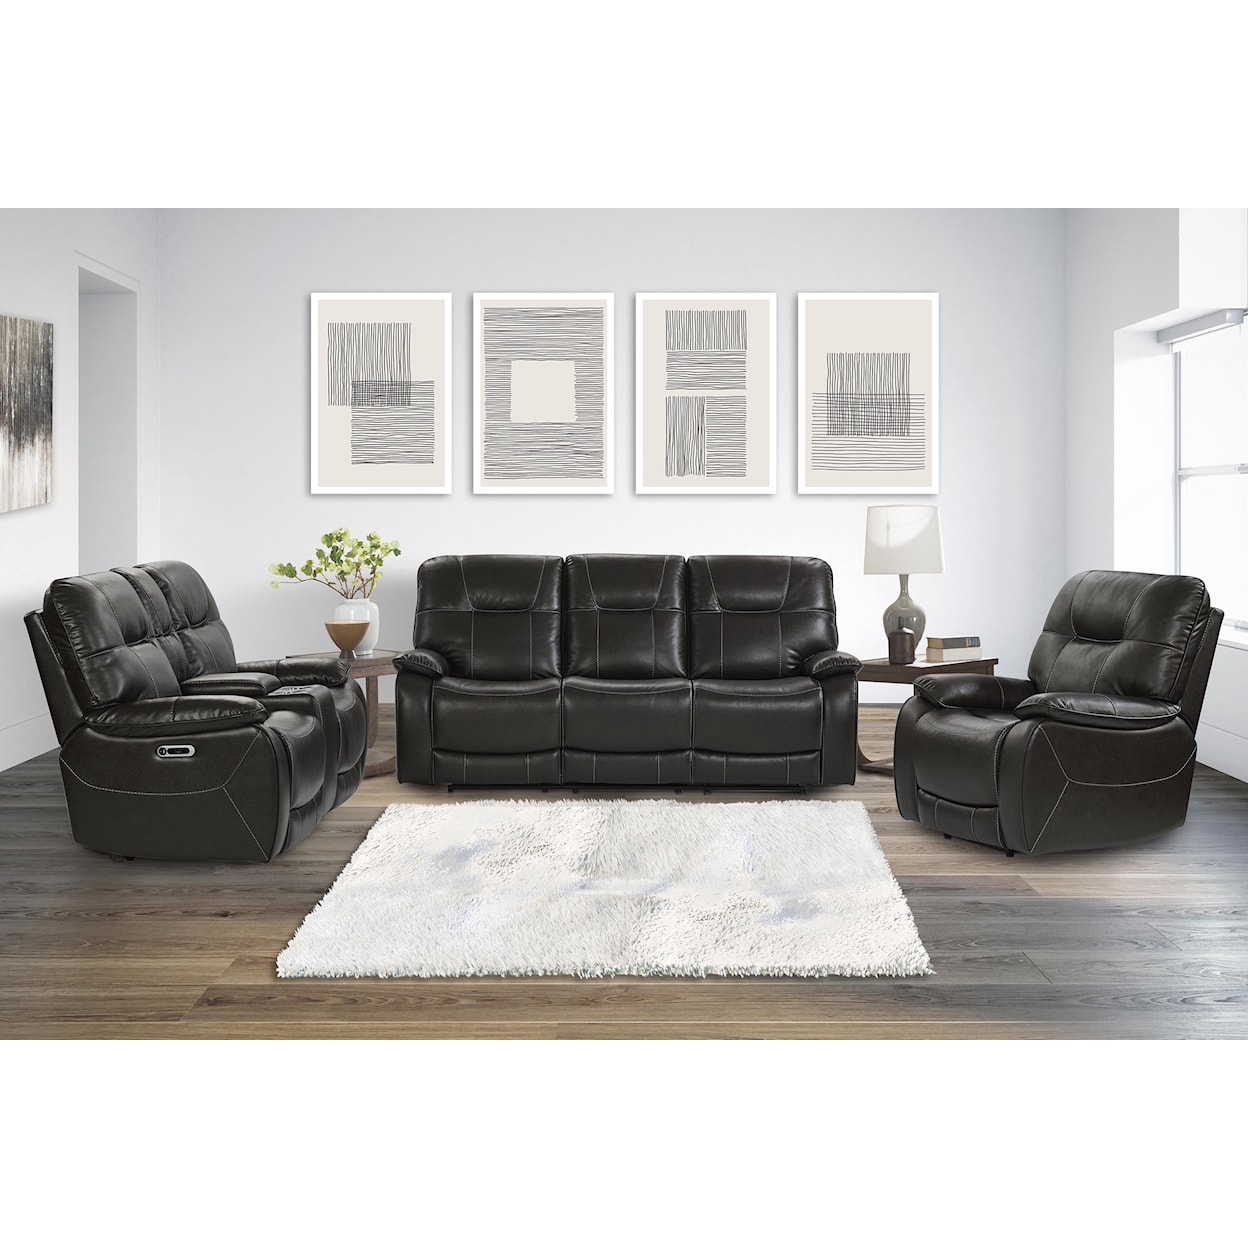 Parker Living Axel Living Room Group